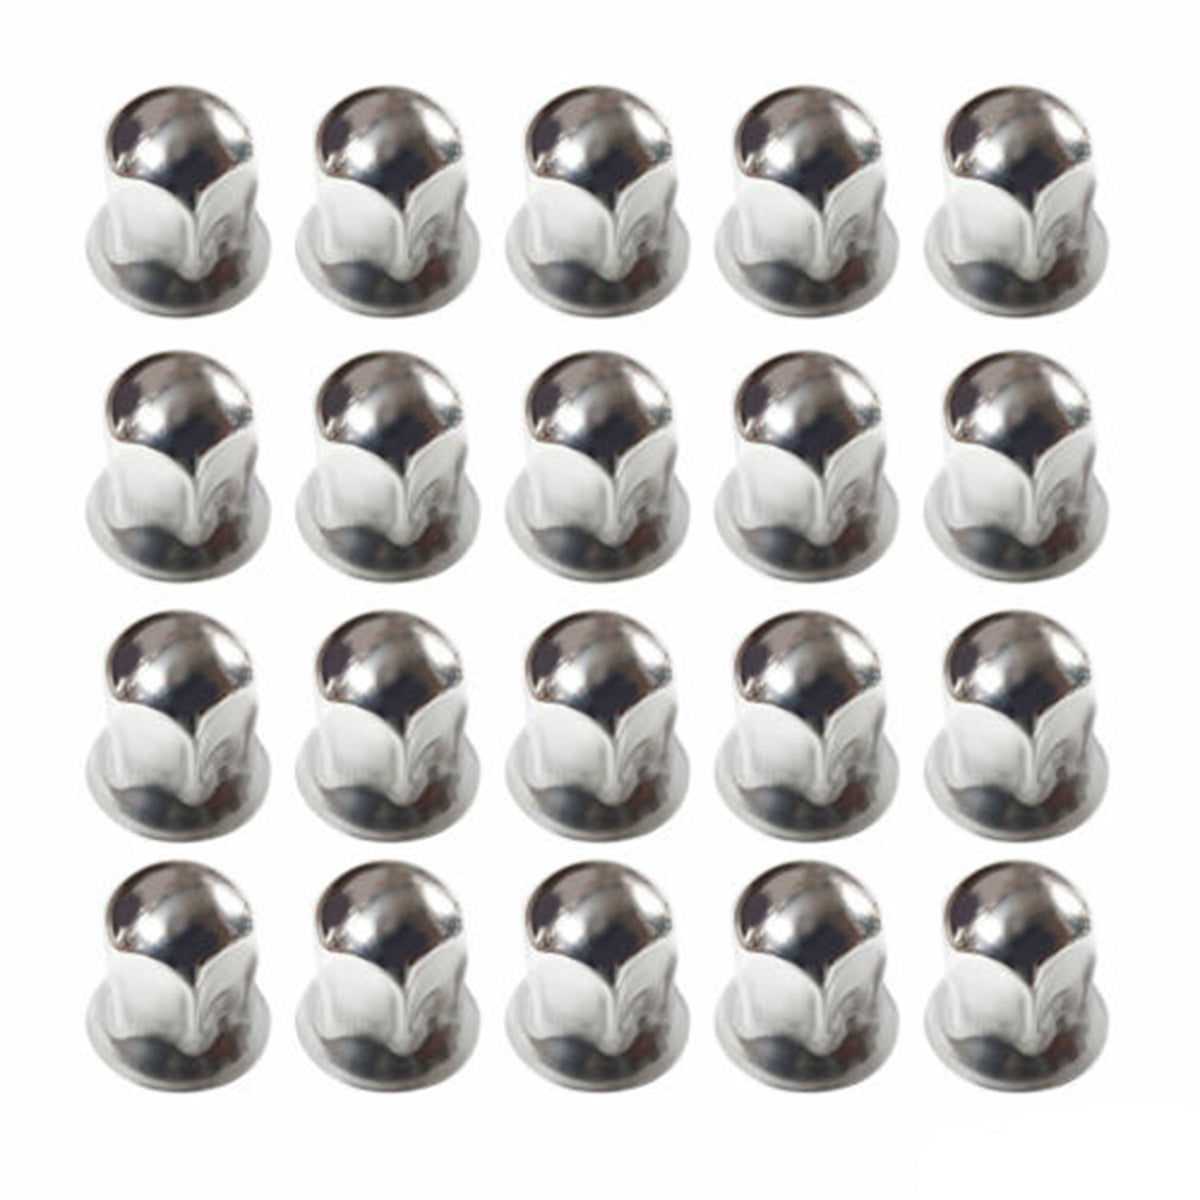 20 x 32mm Truck Wheel Nut Cover Caps Wheel Bolt Cover Protective Cap ABS